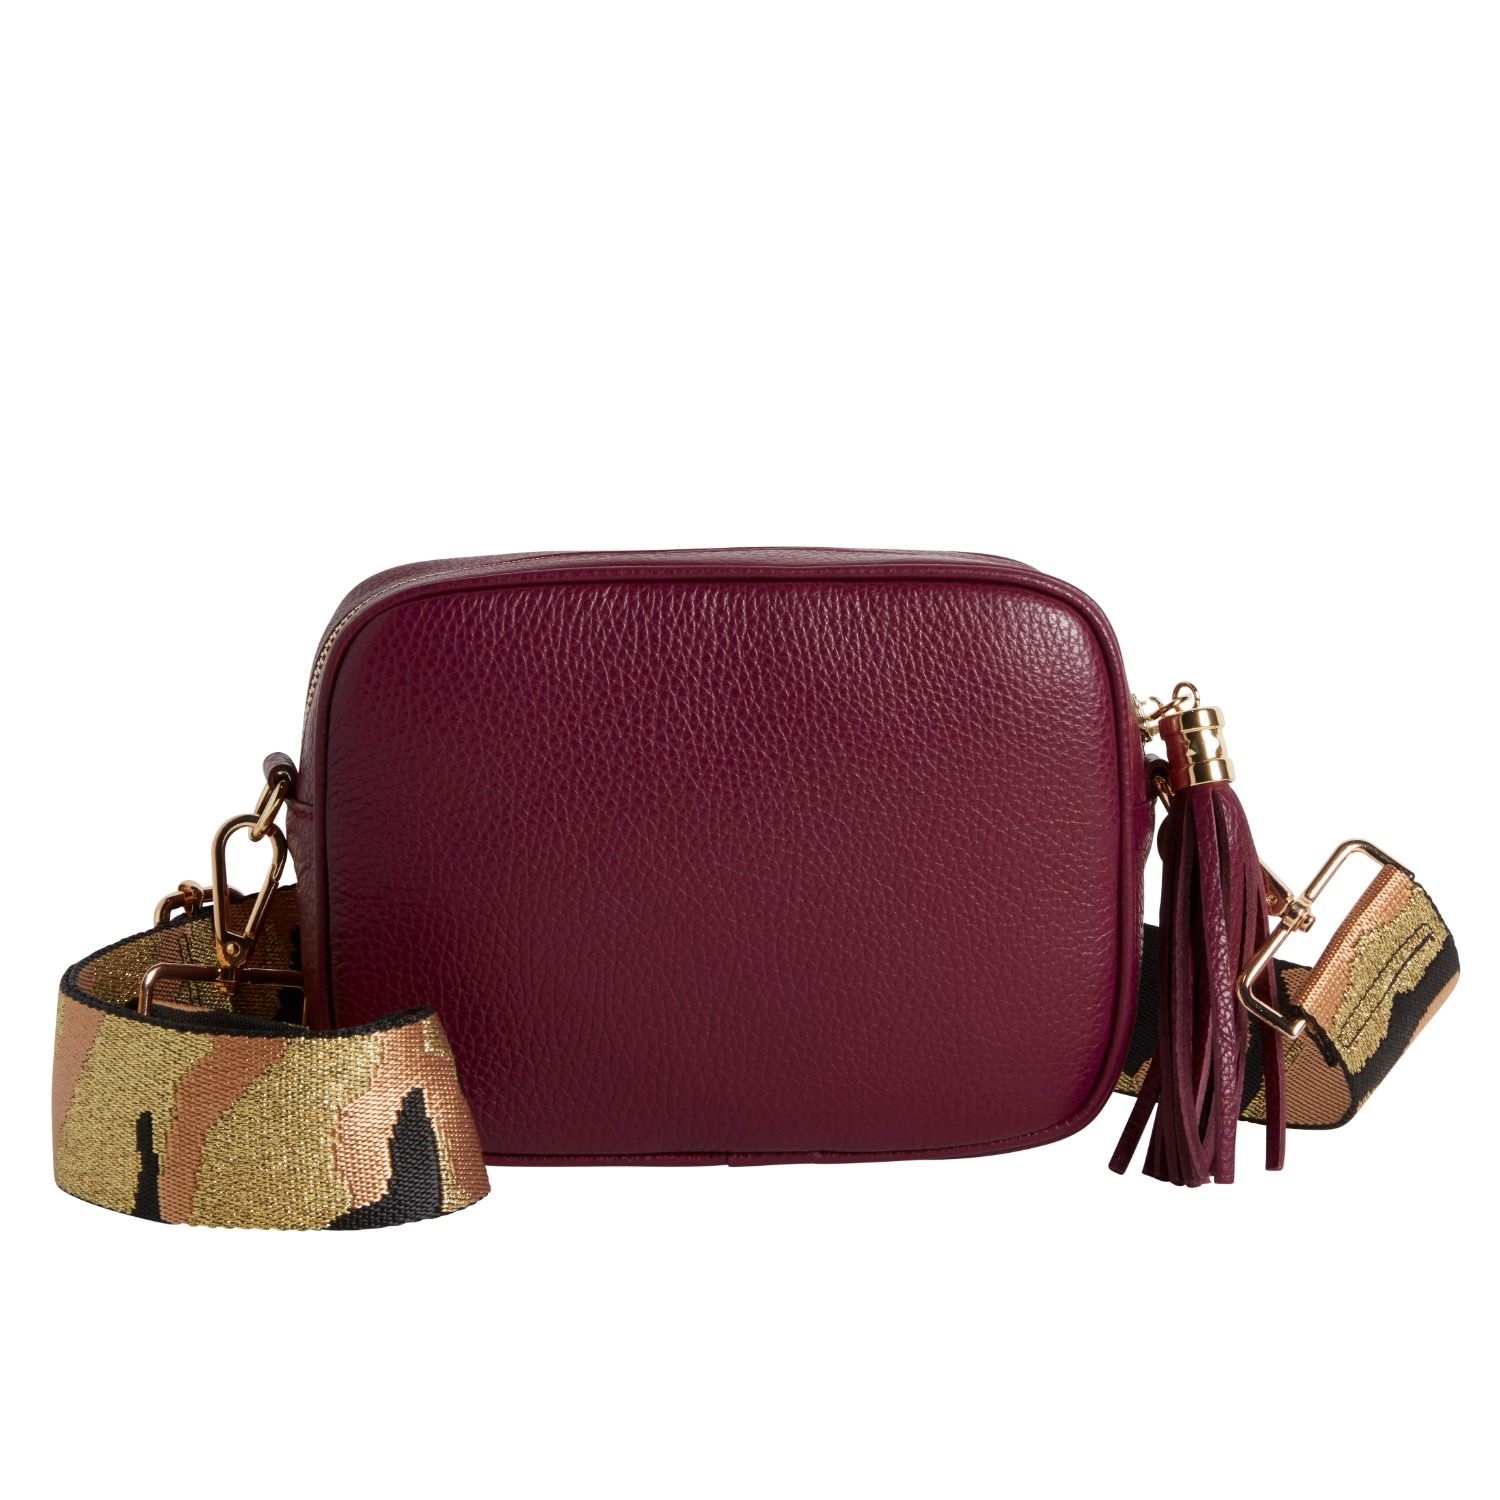 Women's Crossbody Bag in Red with Interchangeable Straps | B & Floss